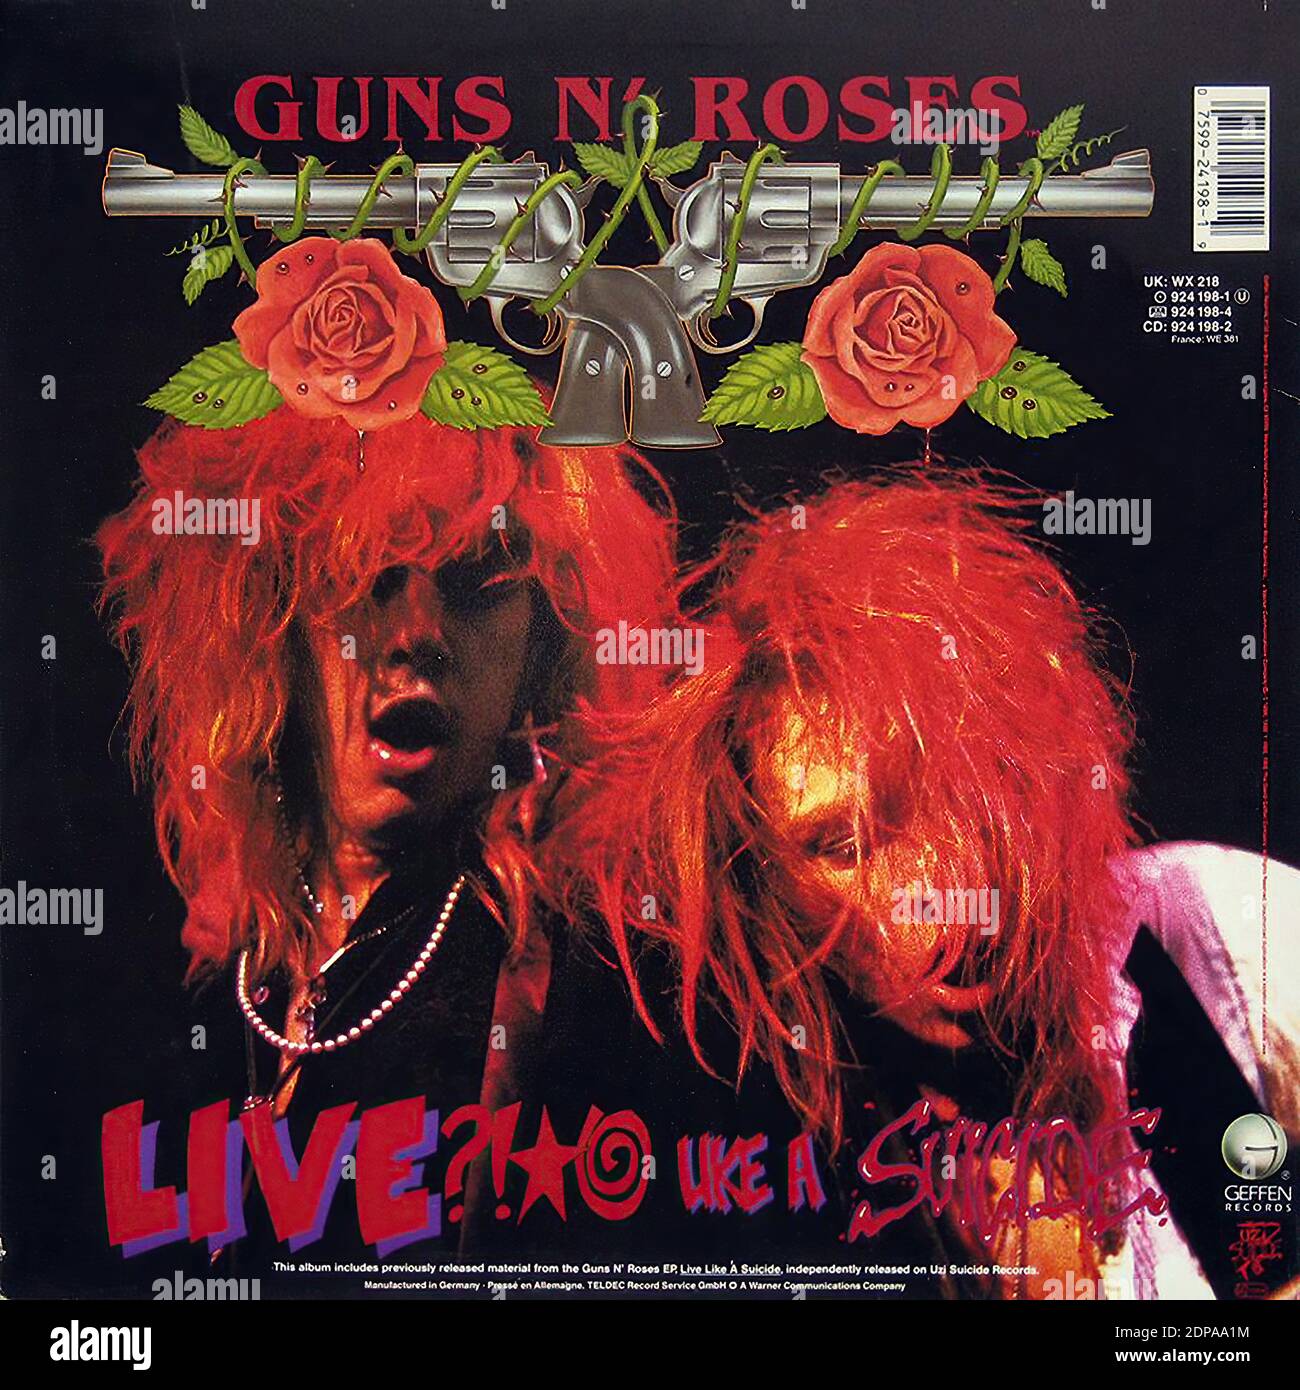 Guns N Roses Album Cover High Resolution Stock Photography and Images -  Alamy